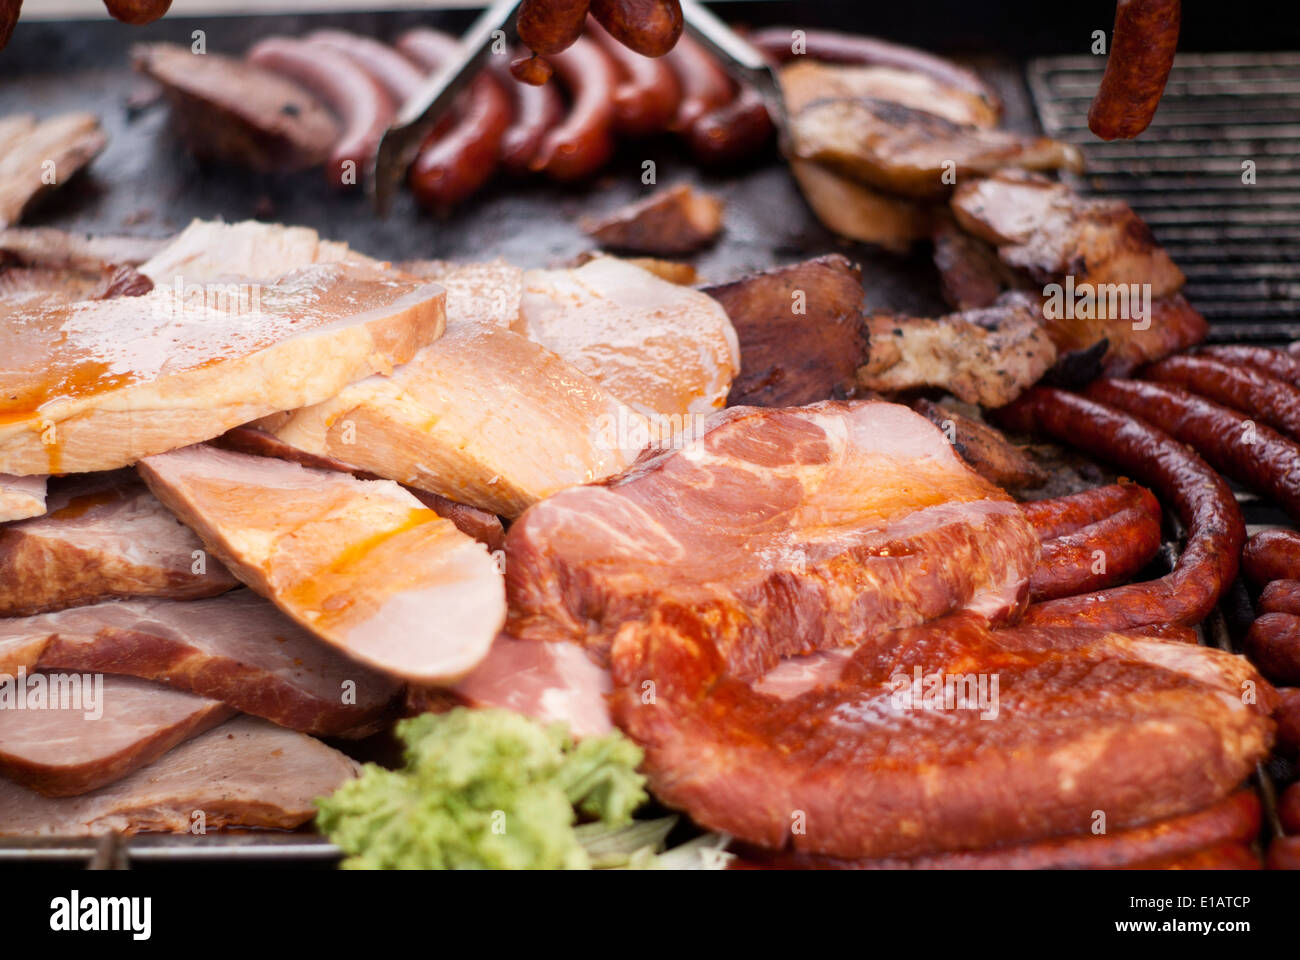 Meat like bacon, beef, speck, steak and wurst on a grill Stock Photo - Alamy